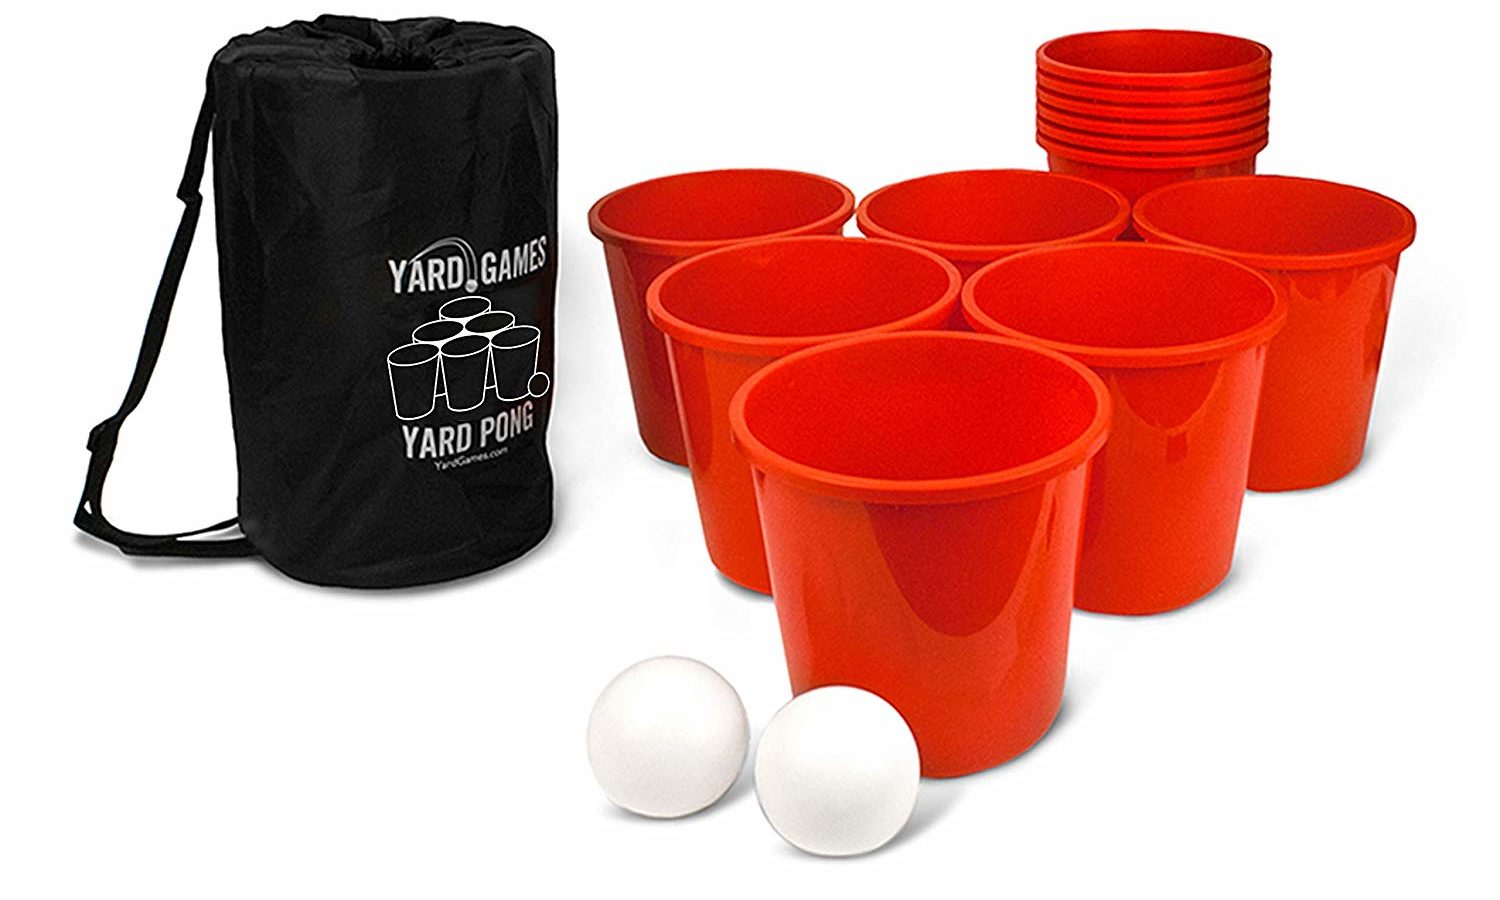 Best Friend Gift Ideas 2022: The Giant Yard Pong Game for Male Friend 2022